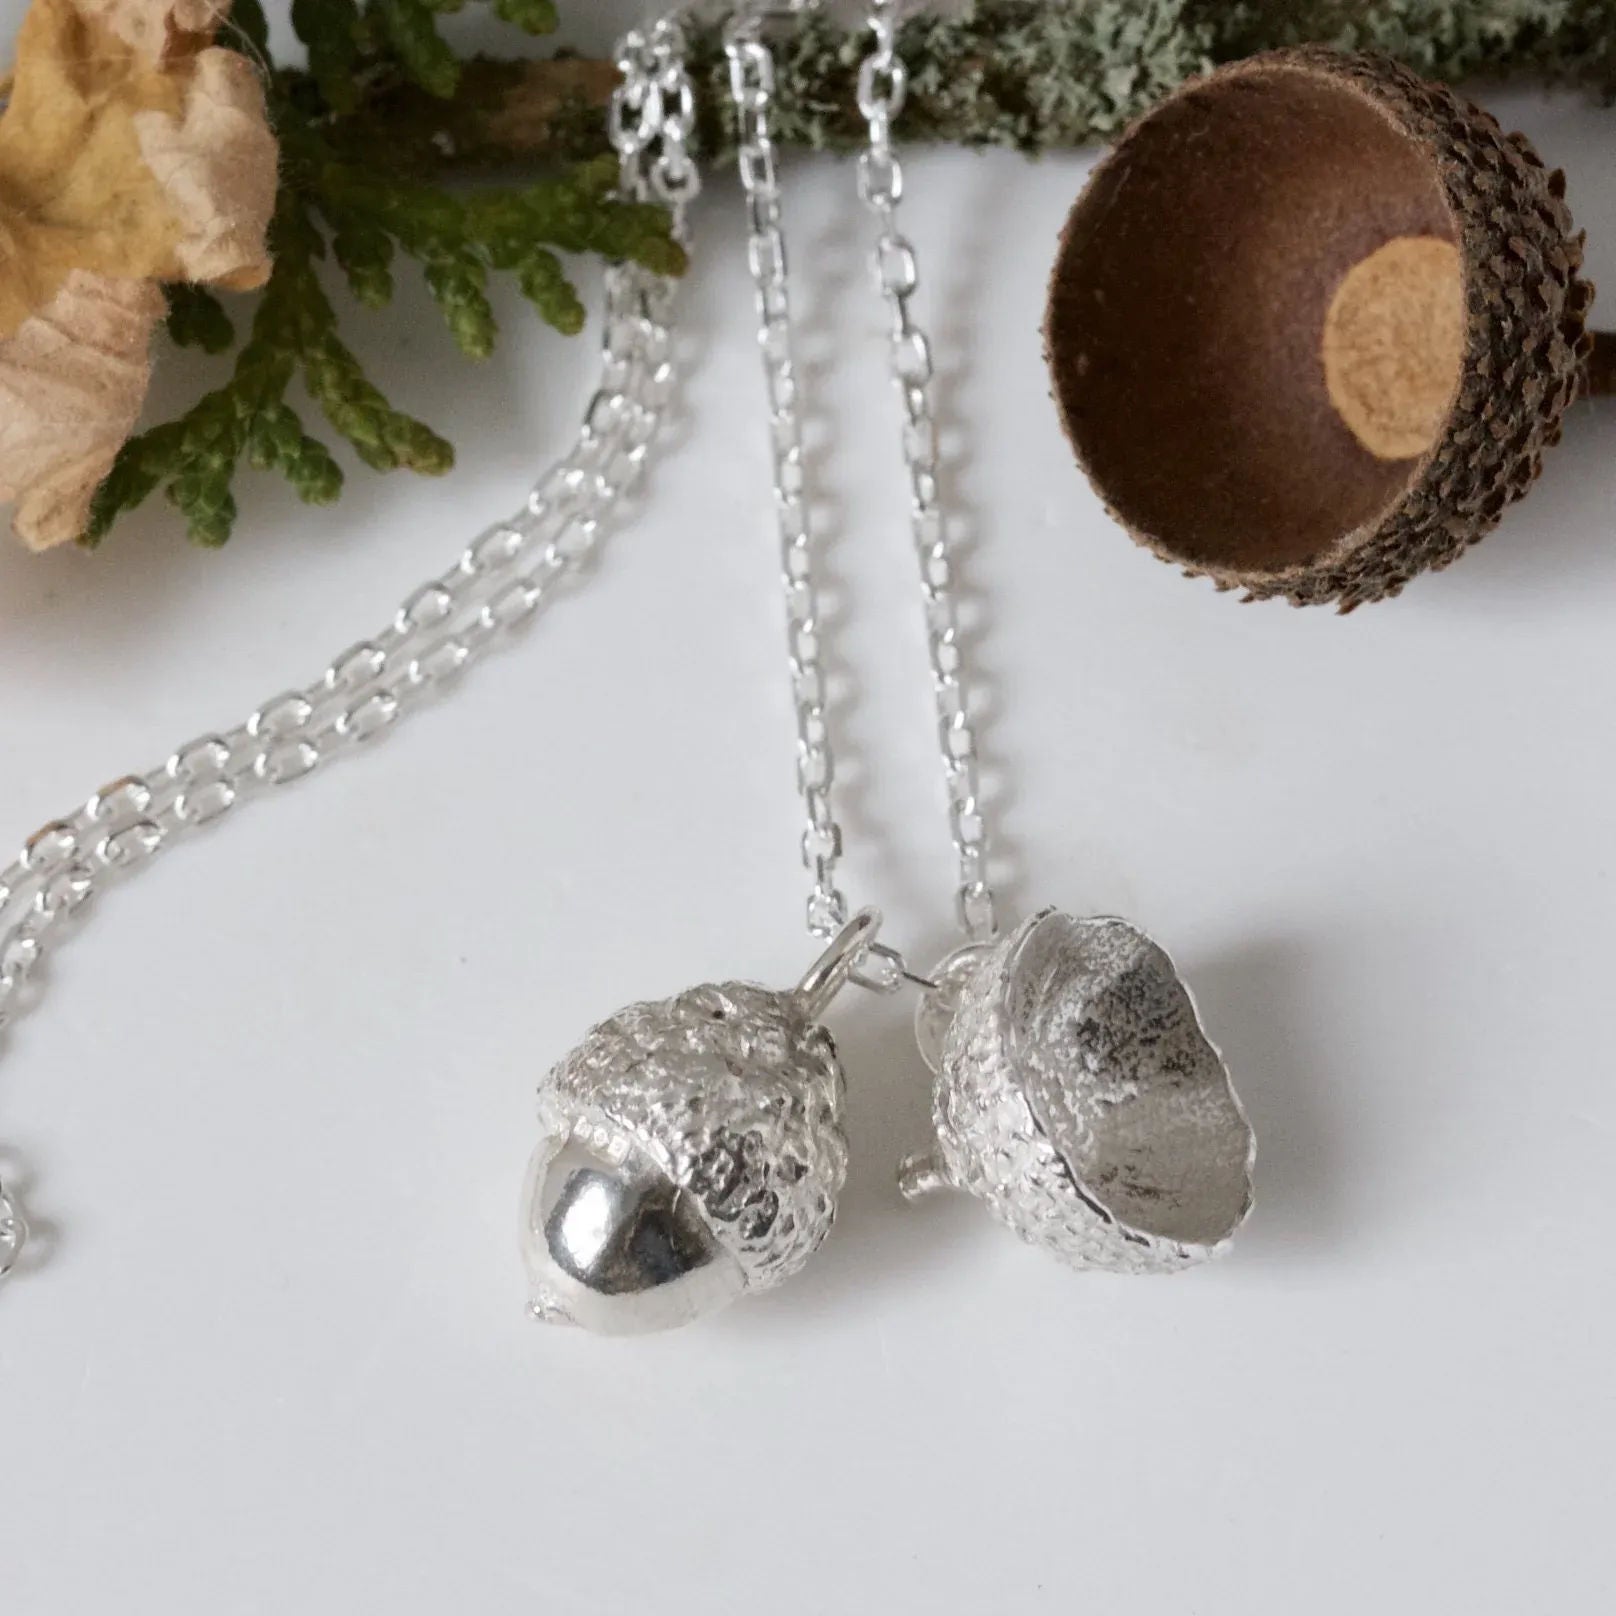 Autumn Acorn Cluster Necklace - Boutee